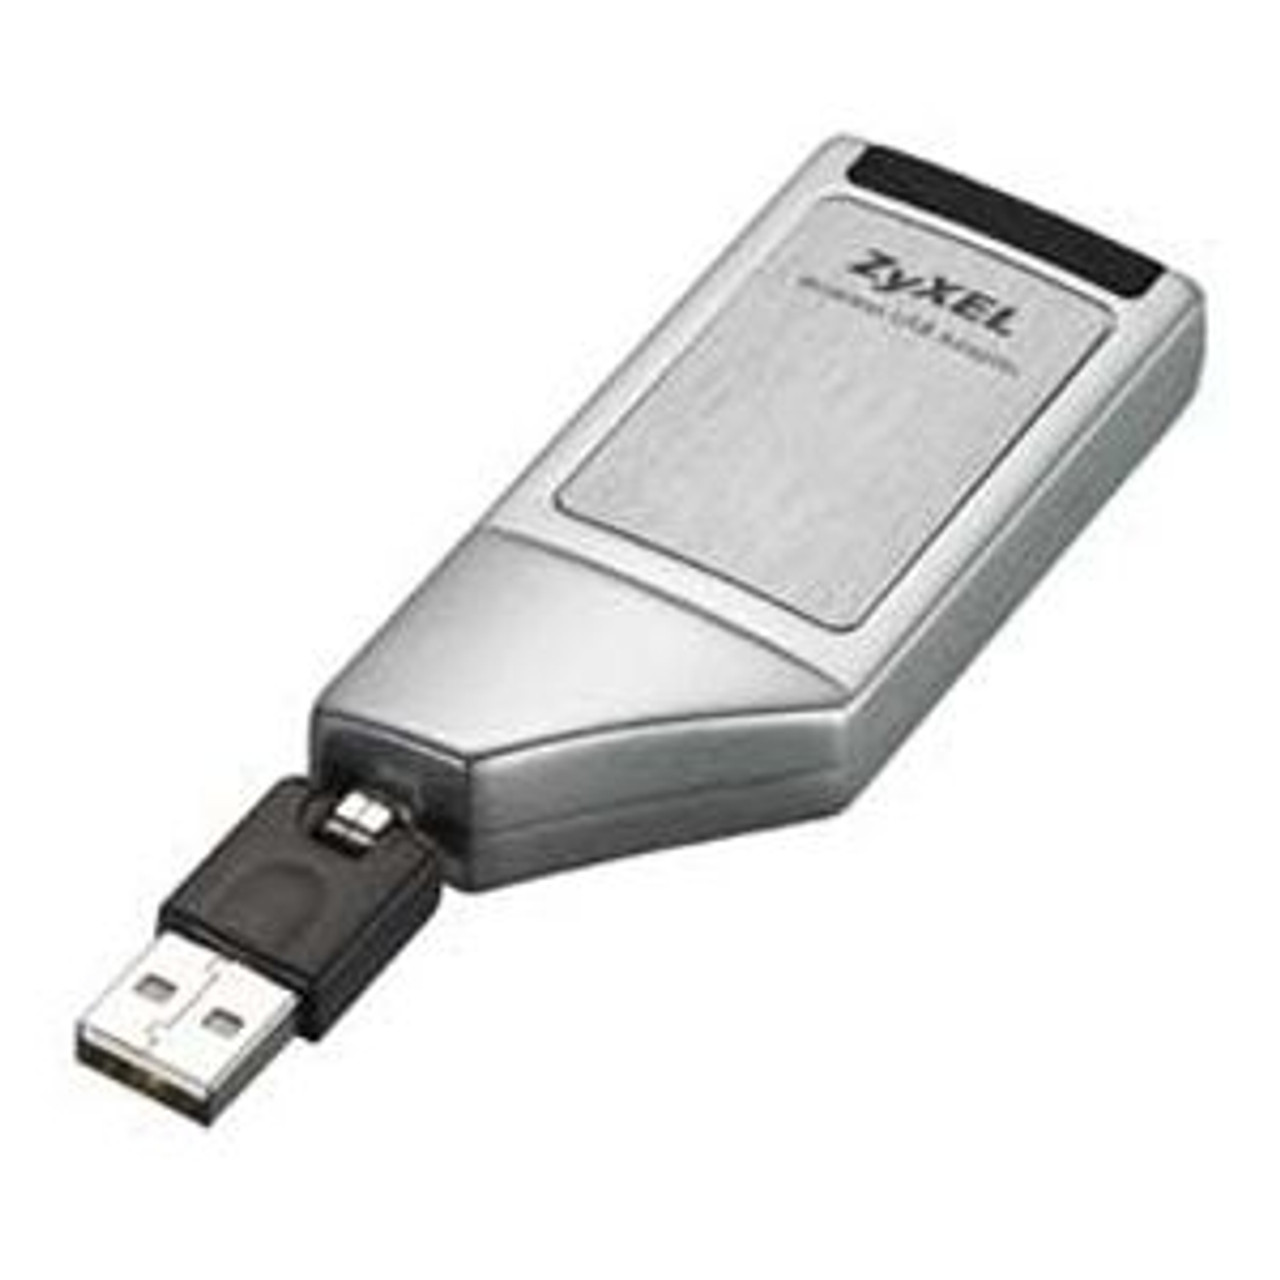 G210H Zyxel G-210H High Power Wireless Adapter USB 54Mbps